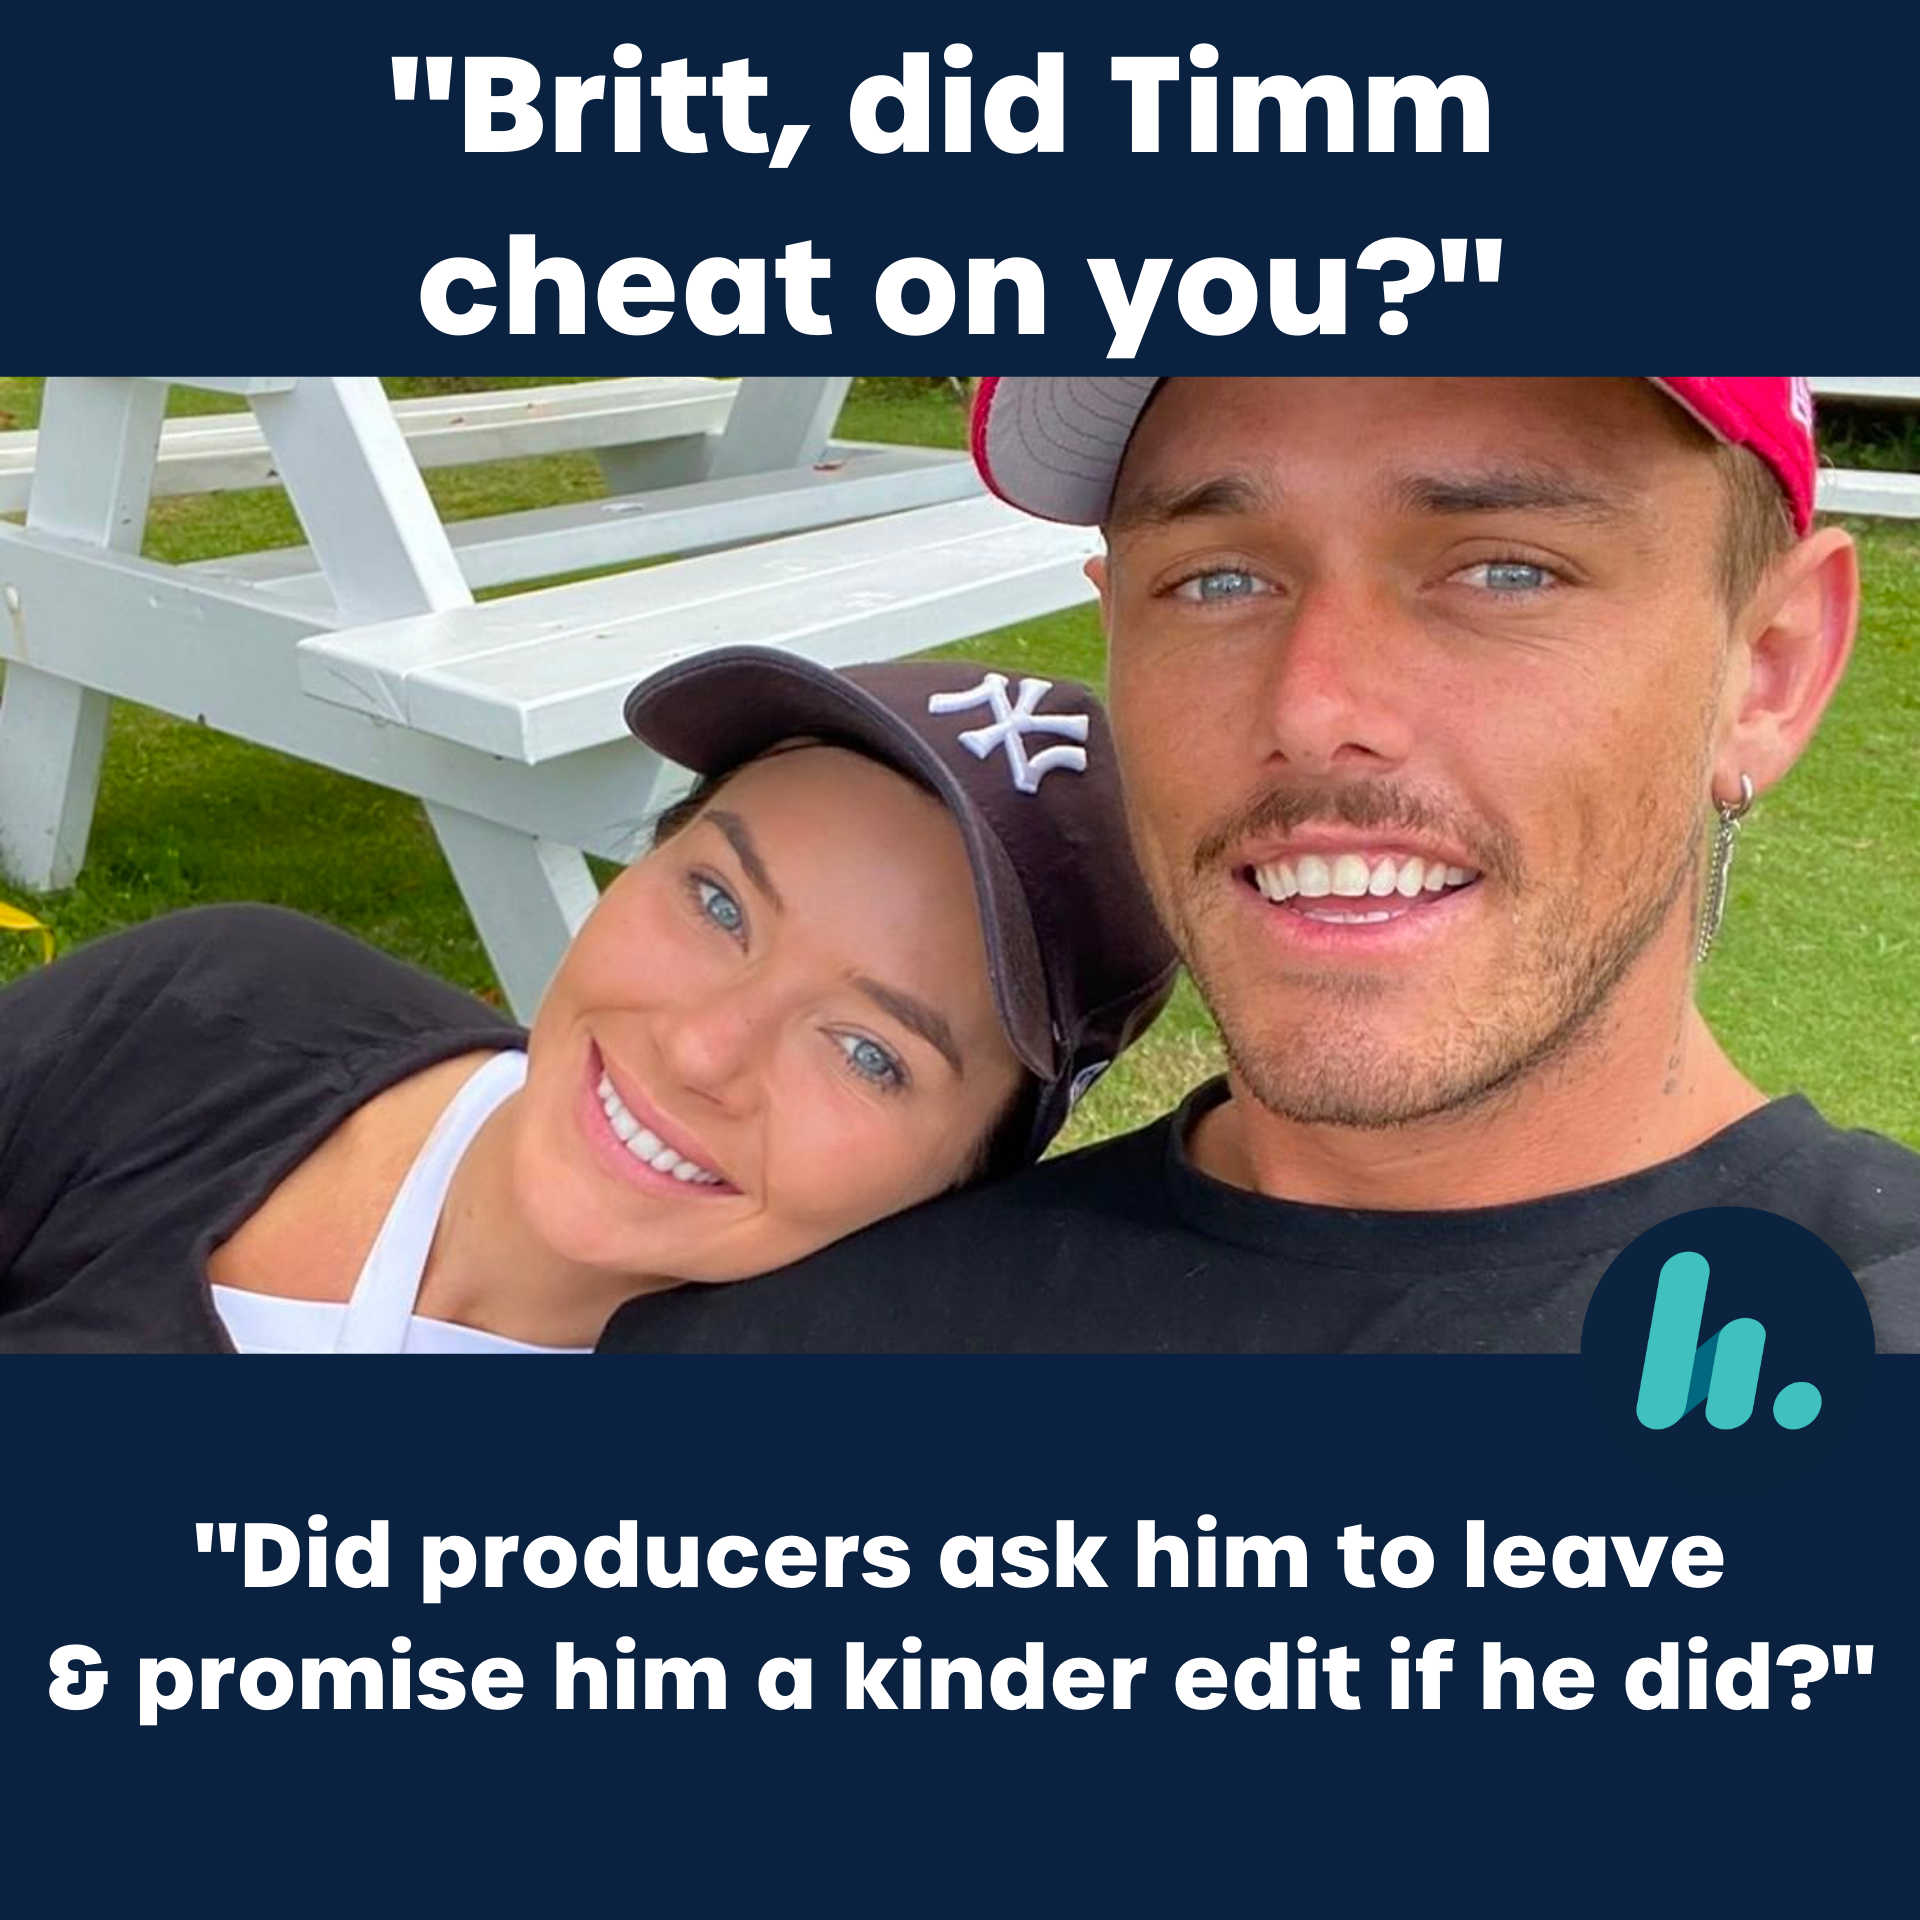 Brittany joined us straight out of paradise to address the rumours that Timm cheated on her and was asked to leave the show by the producers